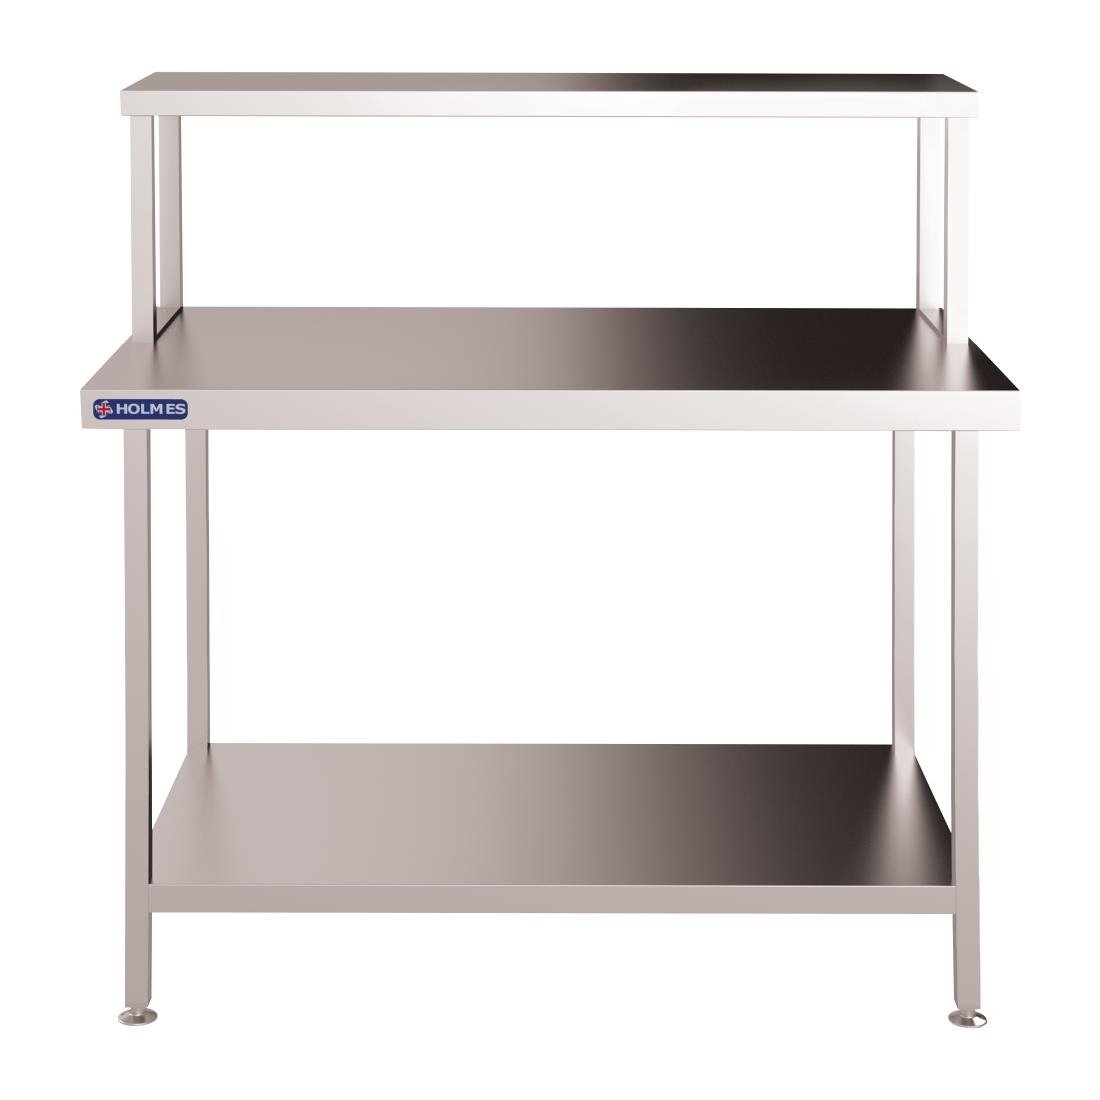 FC451 Holmes Stainless Steel Wall Work Table Welded with Gantry 1800mm JD Catering Equipment Solutions Ltd